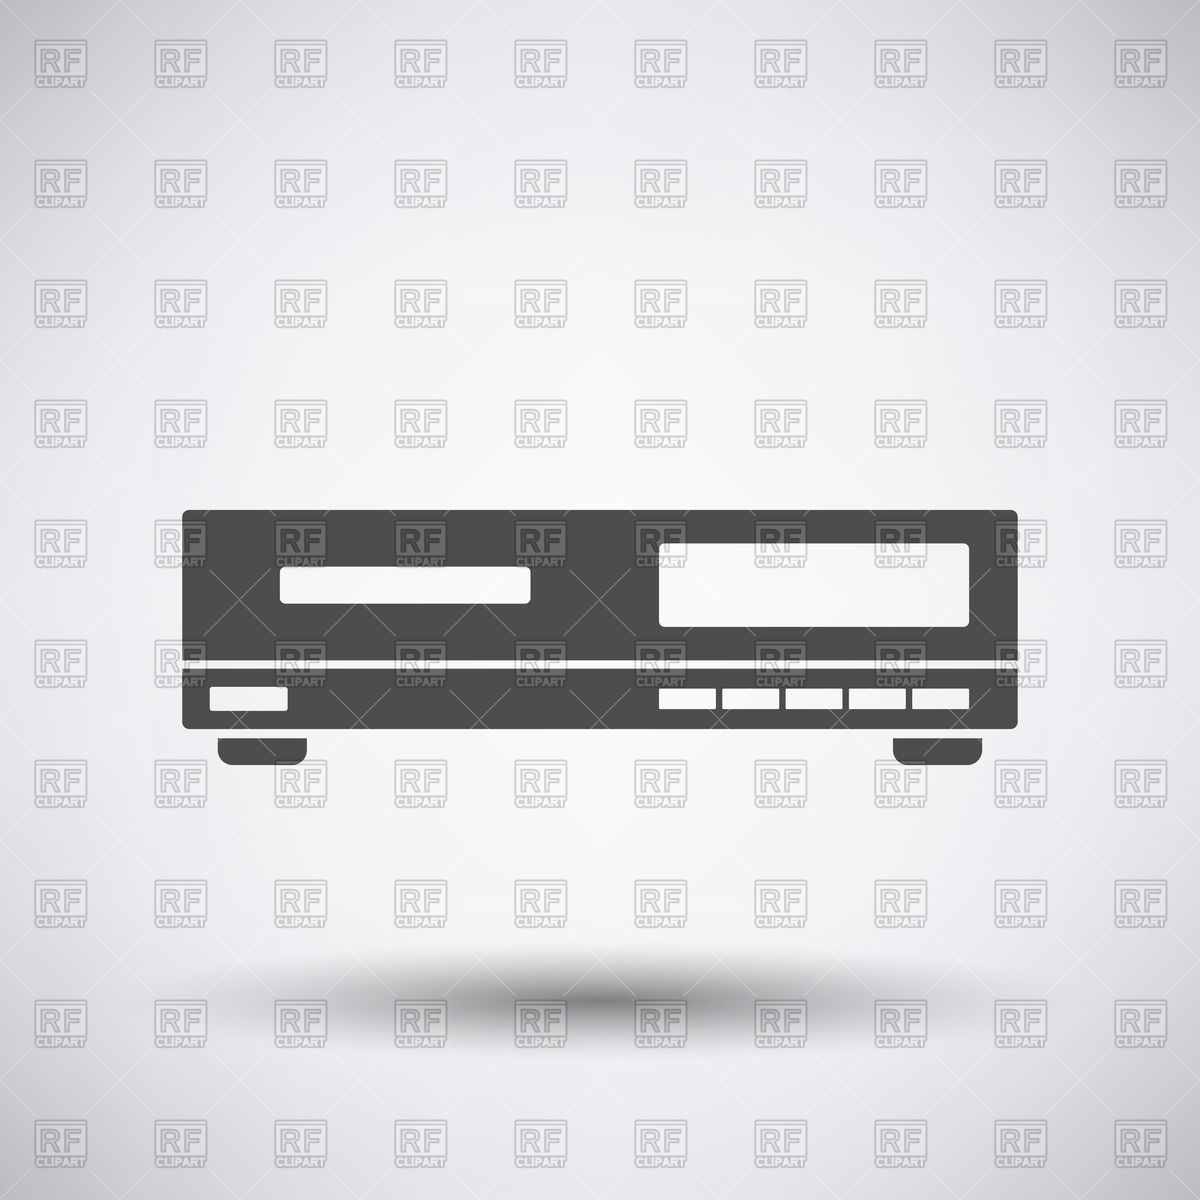 Video cassette recorder (videotape recorder) or DVD player icon.